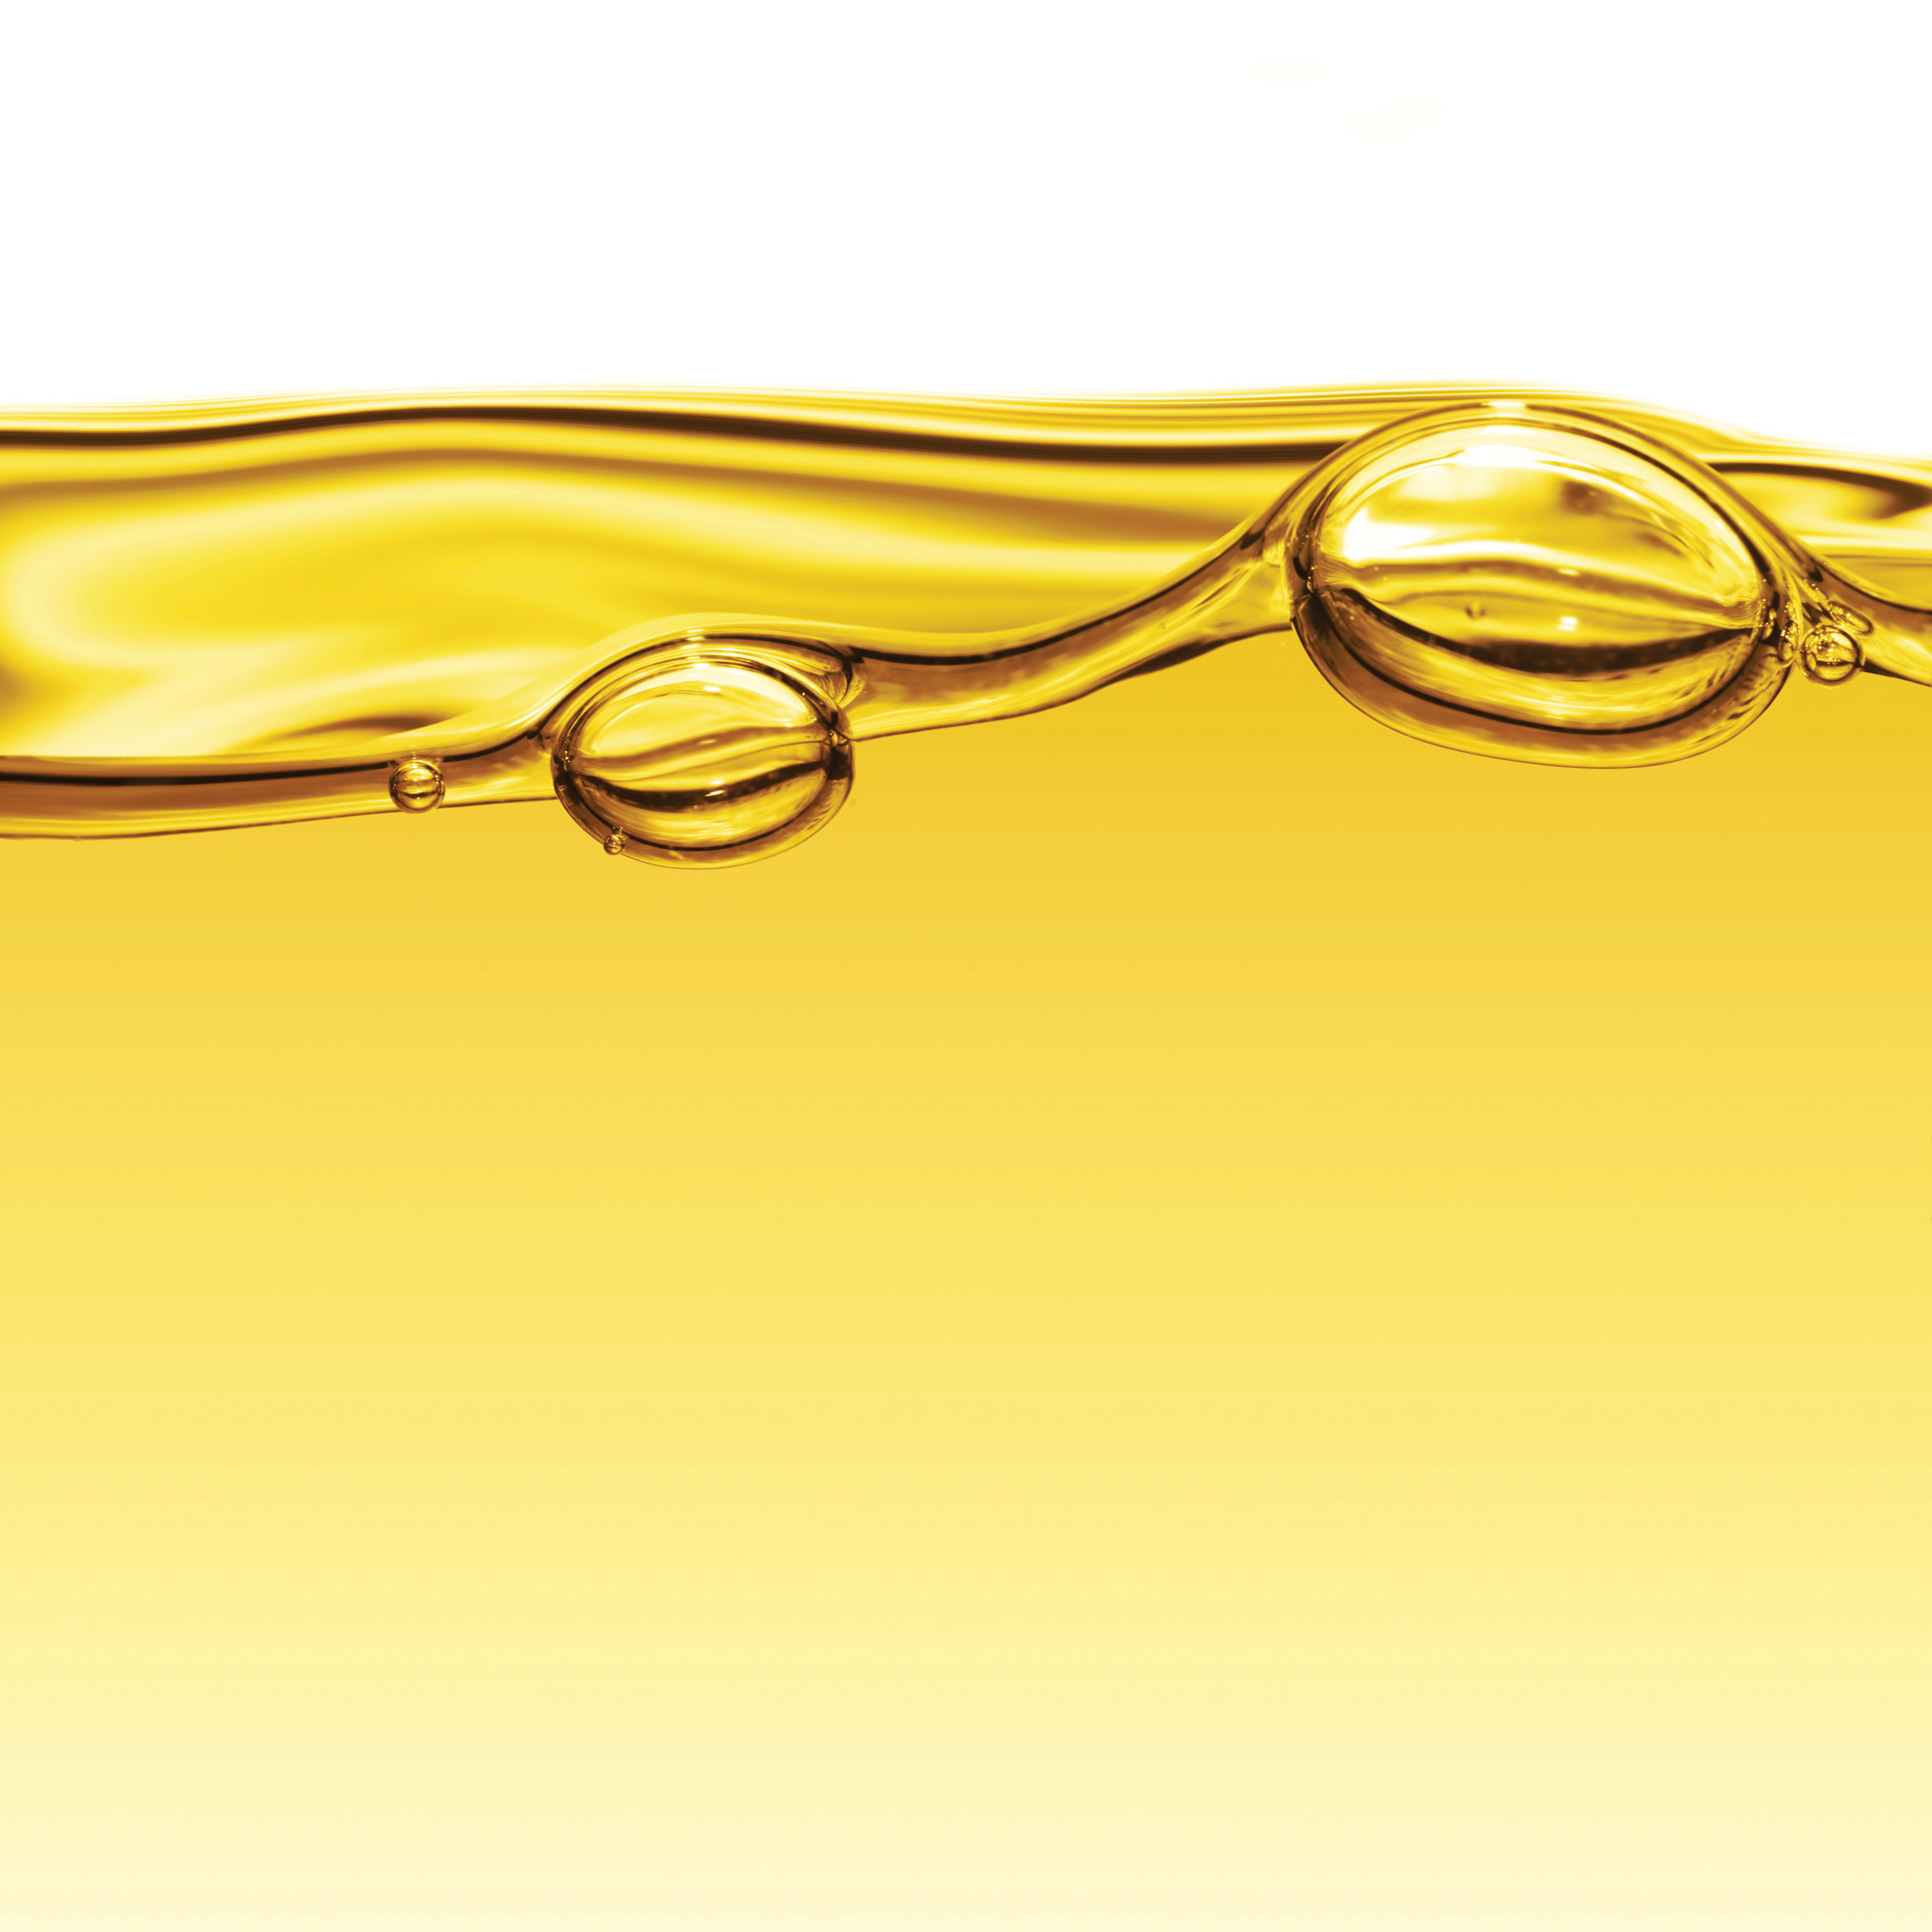 Oils and fats for cooking